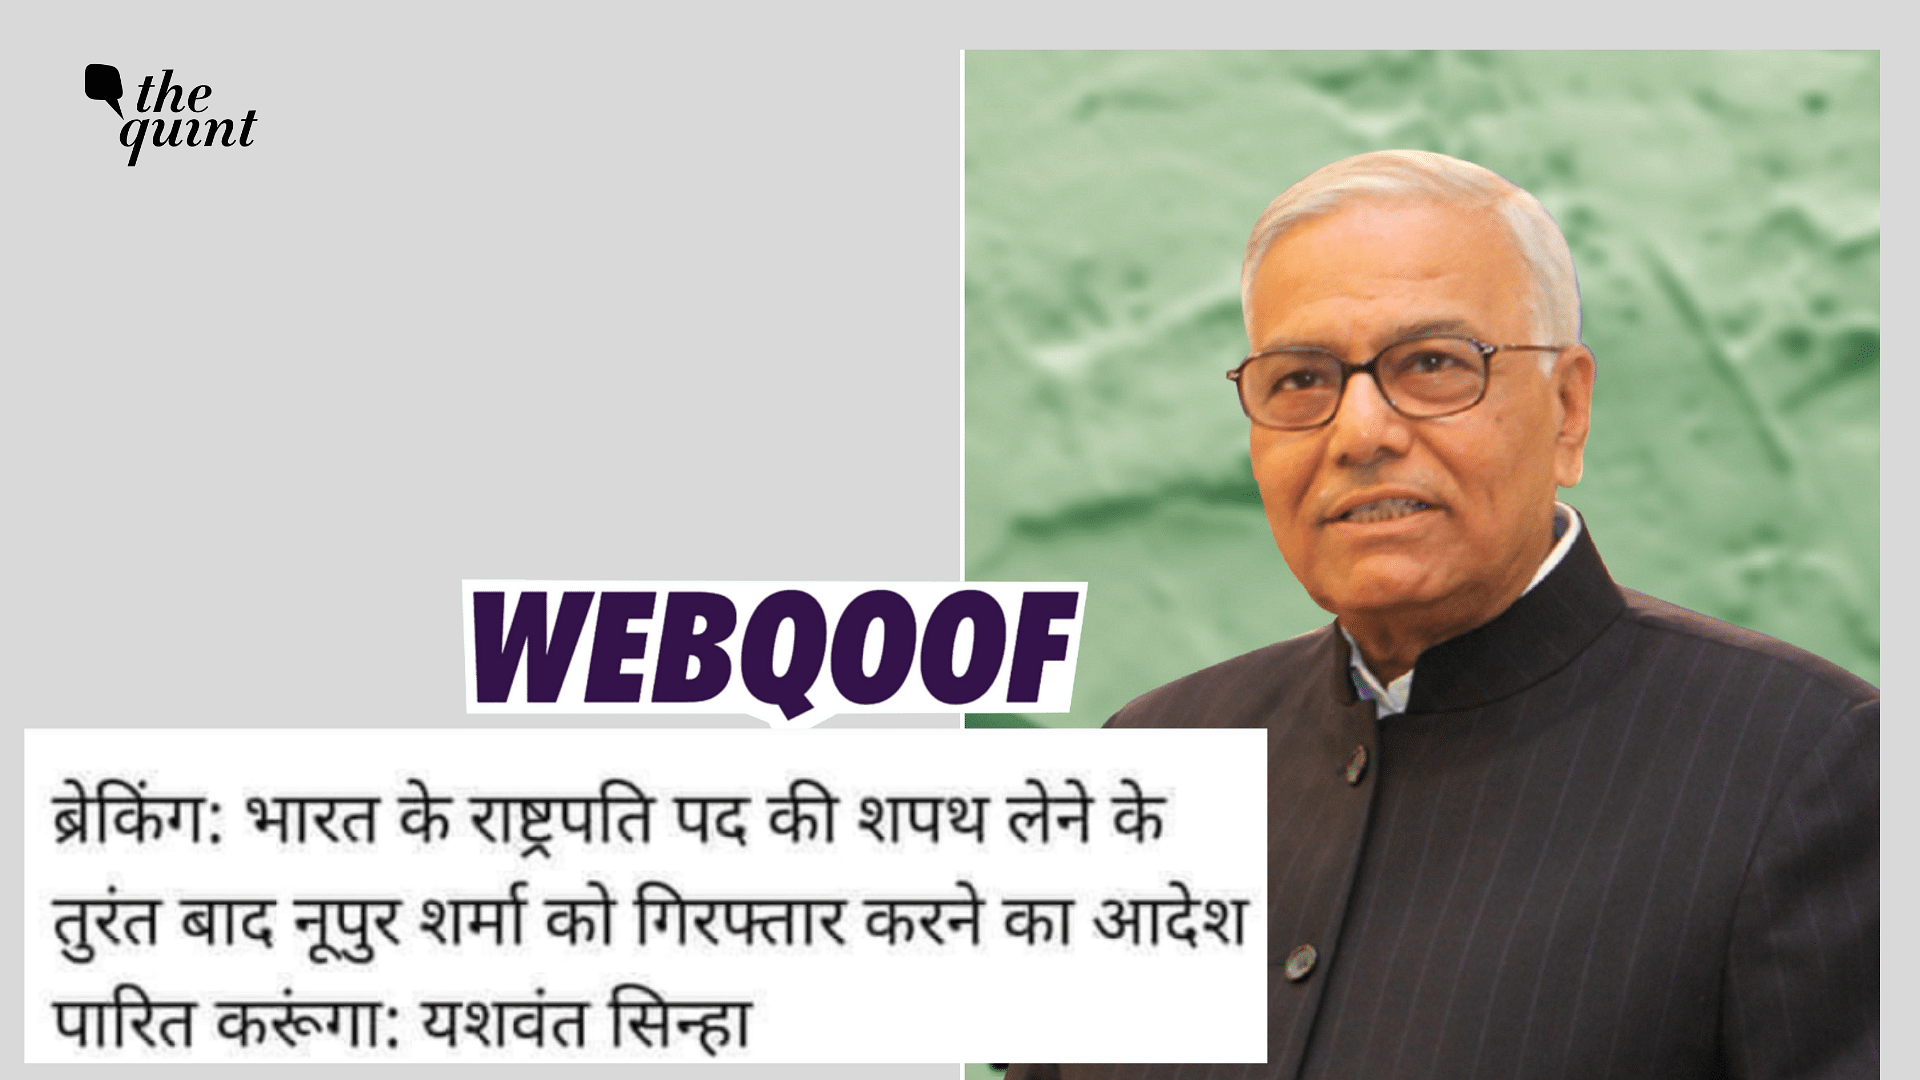 <div class="paragraphs"><p>Fact-check : The claim states that Yashwant Sinha said that he will pass orders to arrest Nupur Sharma after he gets elected by the President.</p></div>